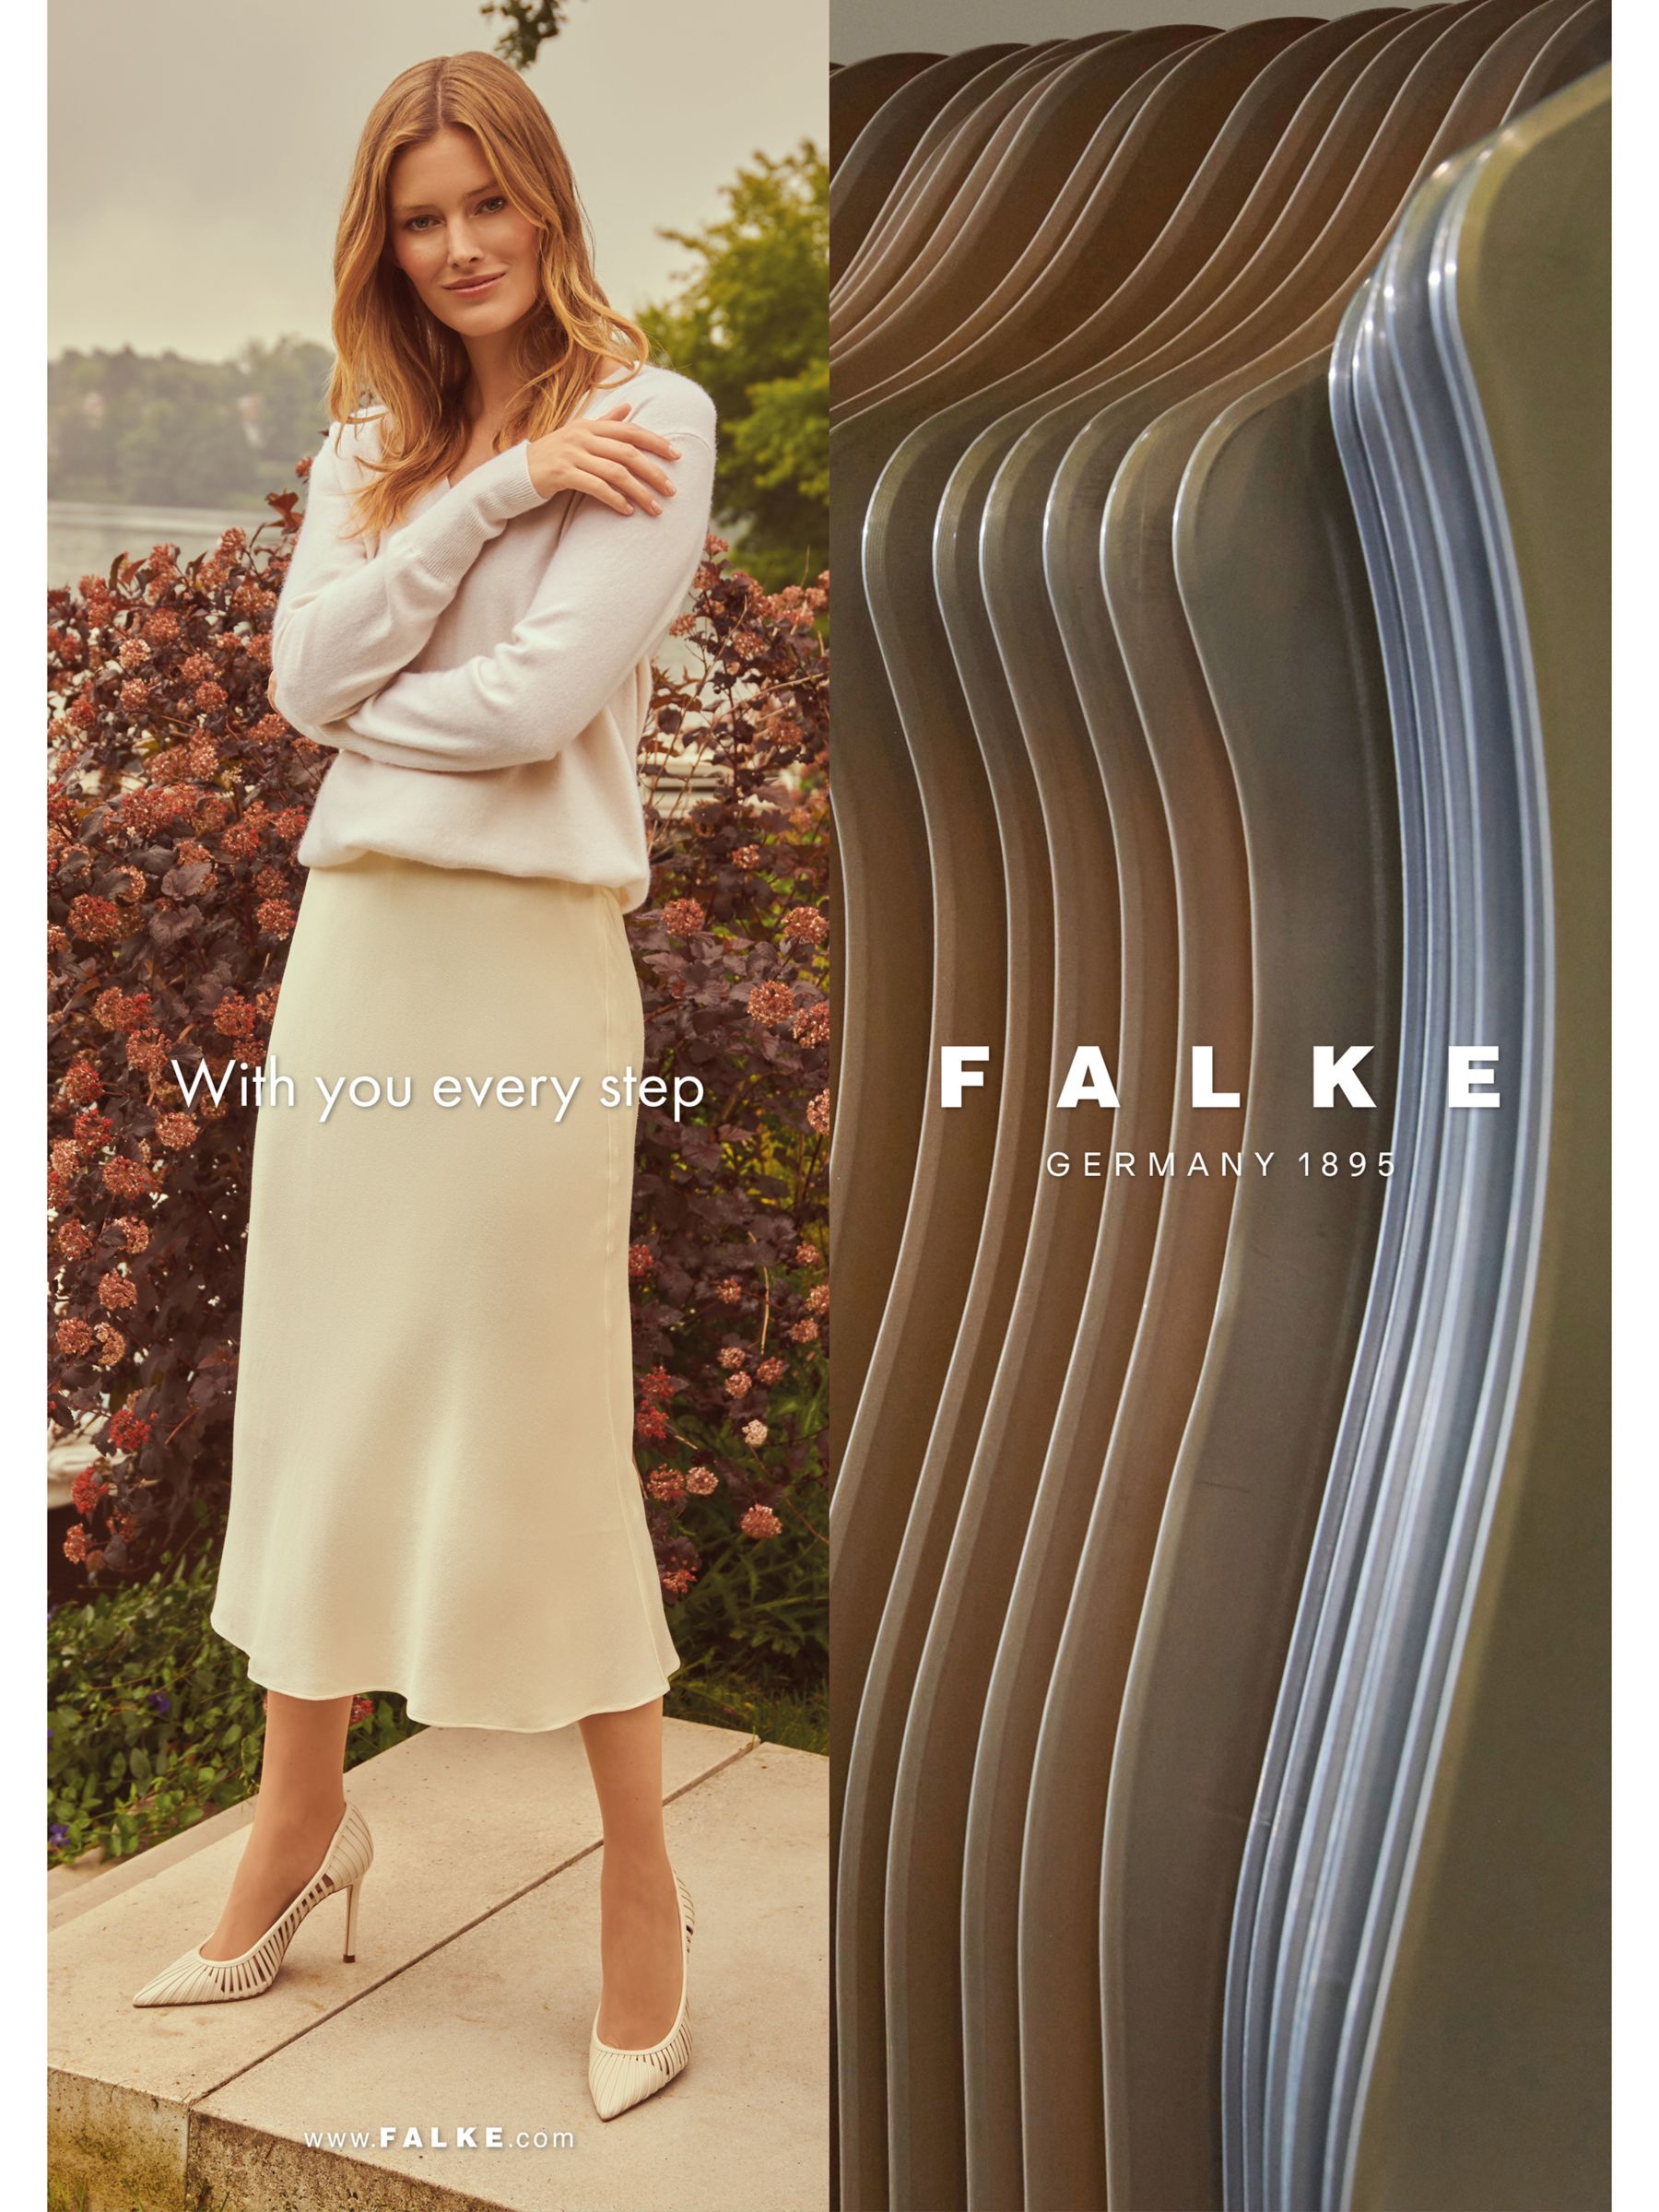 Buy FALKE 8 Denier Invisible Deluxe Tights Online at johnlewis.com